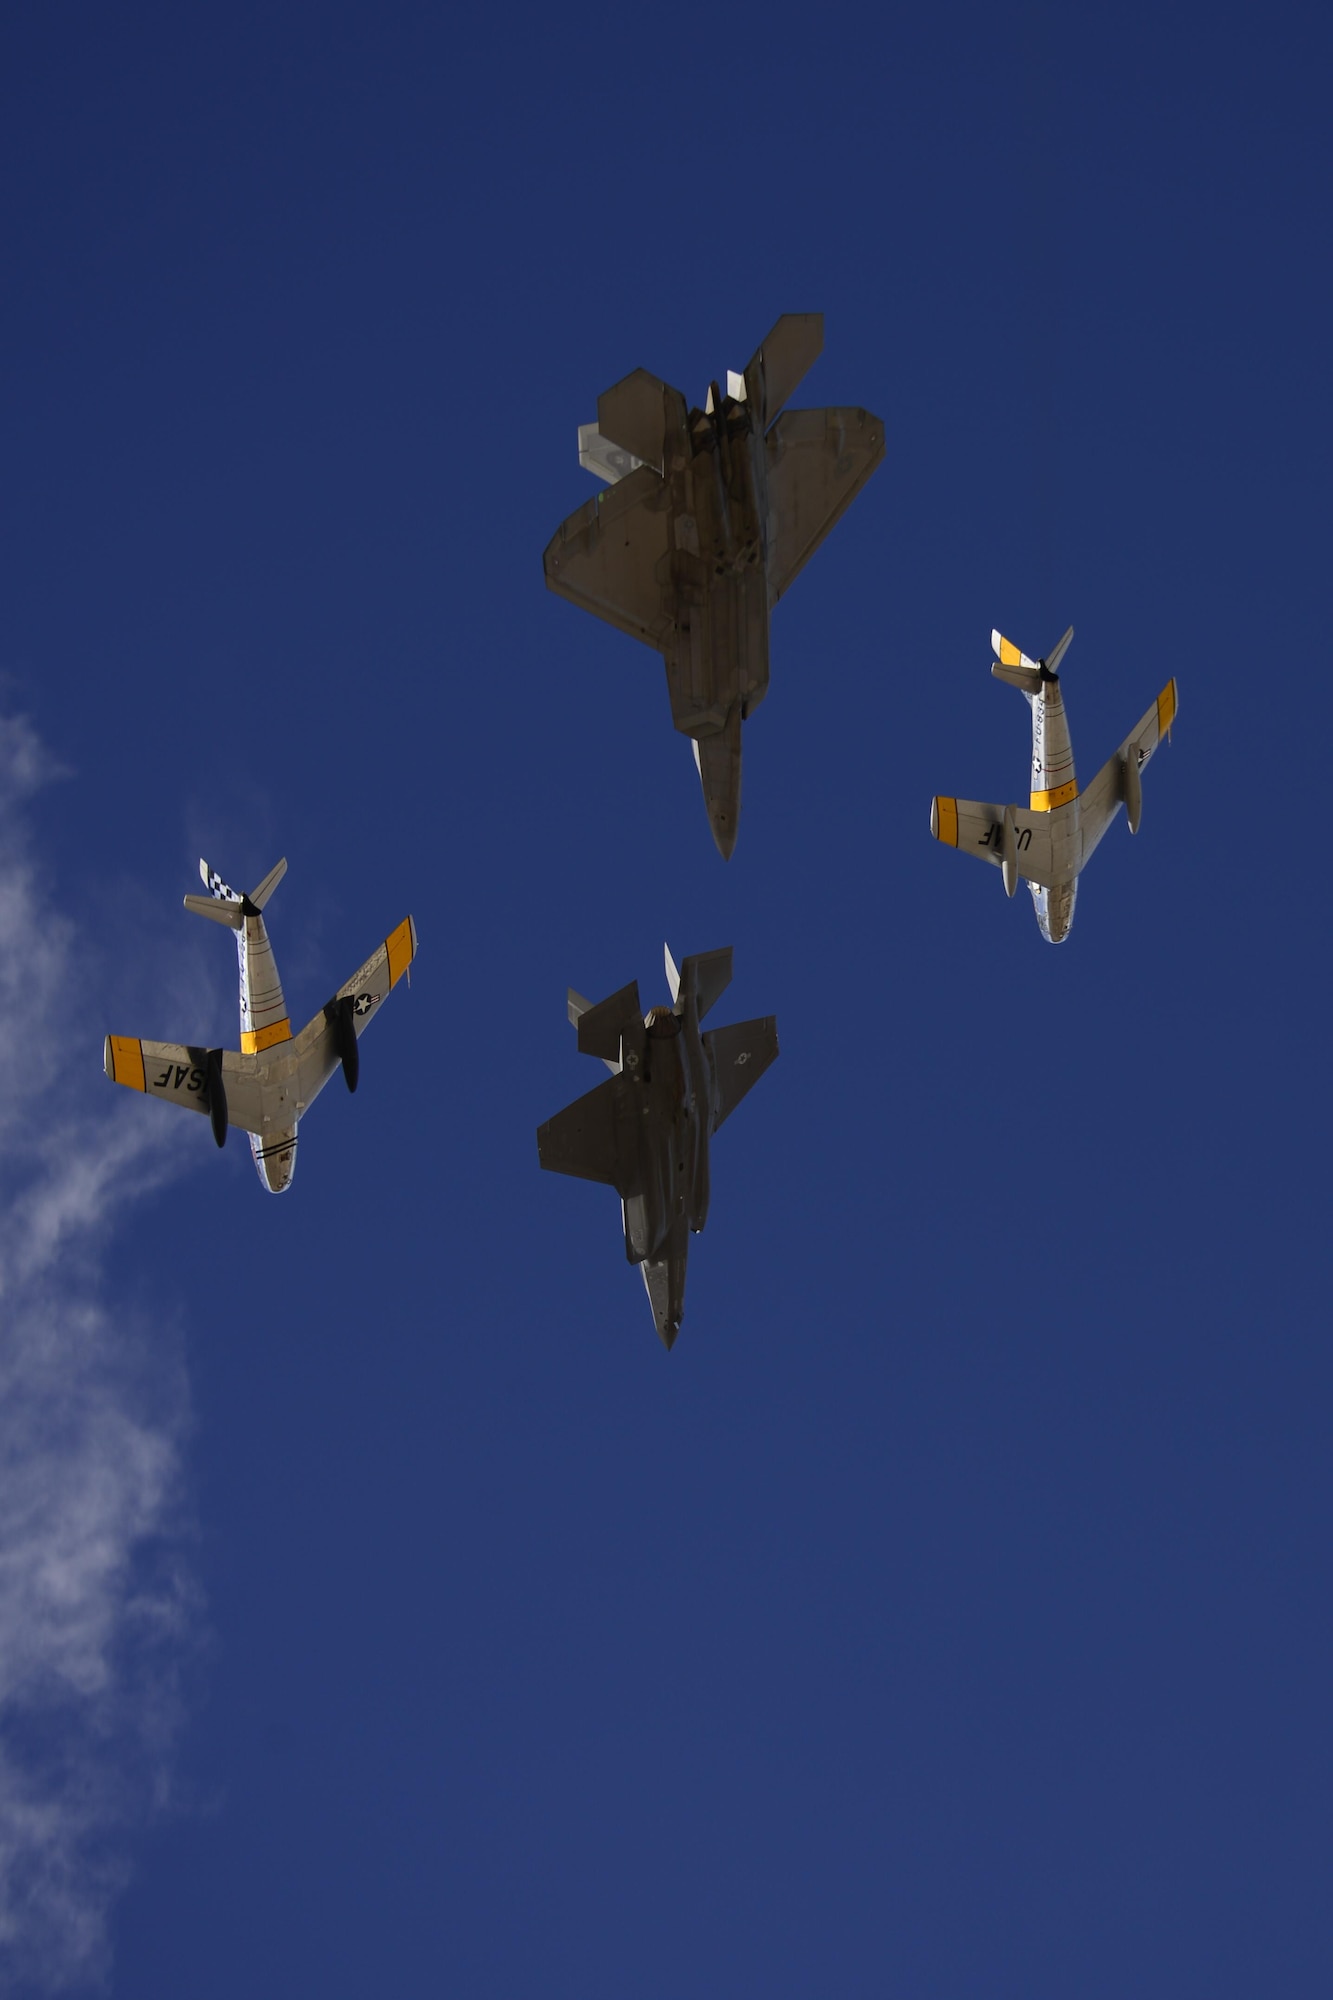 A U.S. Air Force F-22 Raptor, a F-35 Lightning II and two F-86 Sabre's fly in formation during the 2017 Heritage Flight Training and Certification Course at Davis-Monthan Air Force Base, Ariz., Feb. 12, 2017. During the course, aircrews practice ground and flight training to enable civilian pilots of historic military aircraft and U.S. Air Force pilots of current fighter aircraft to fly safely in formations together. (U.S. Air Force photo by Senior Airman Betty R. Chevalier)